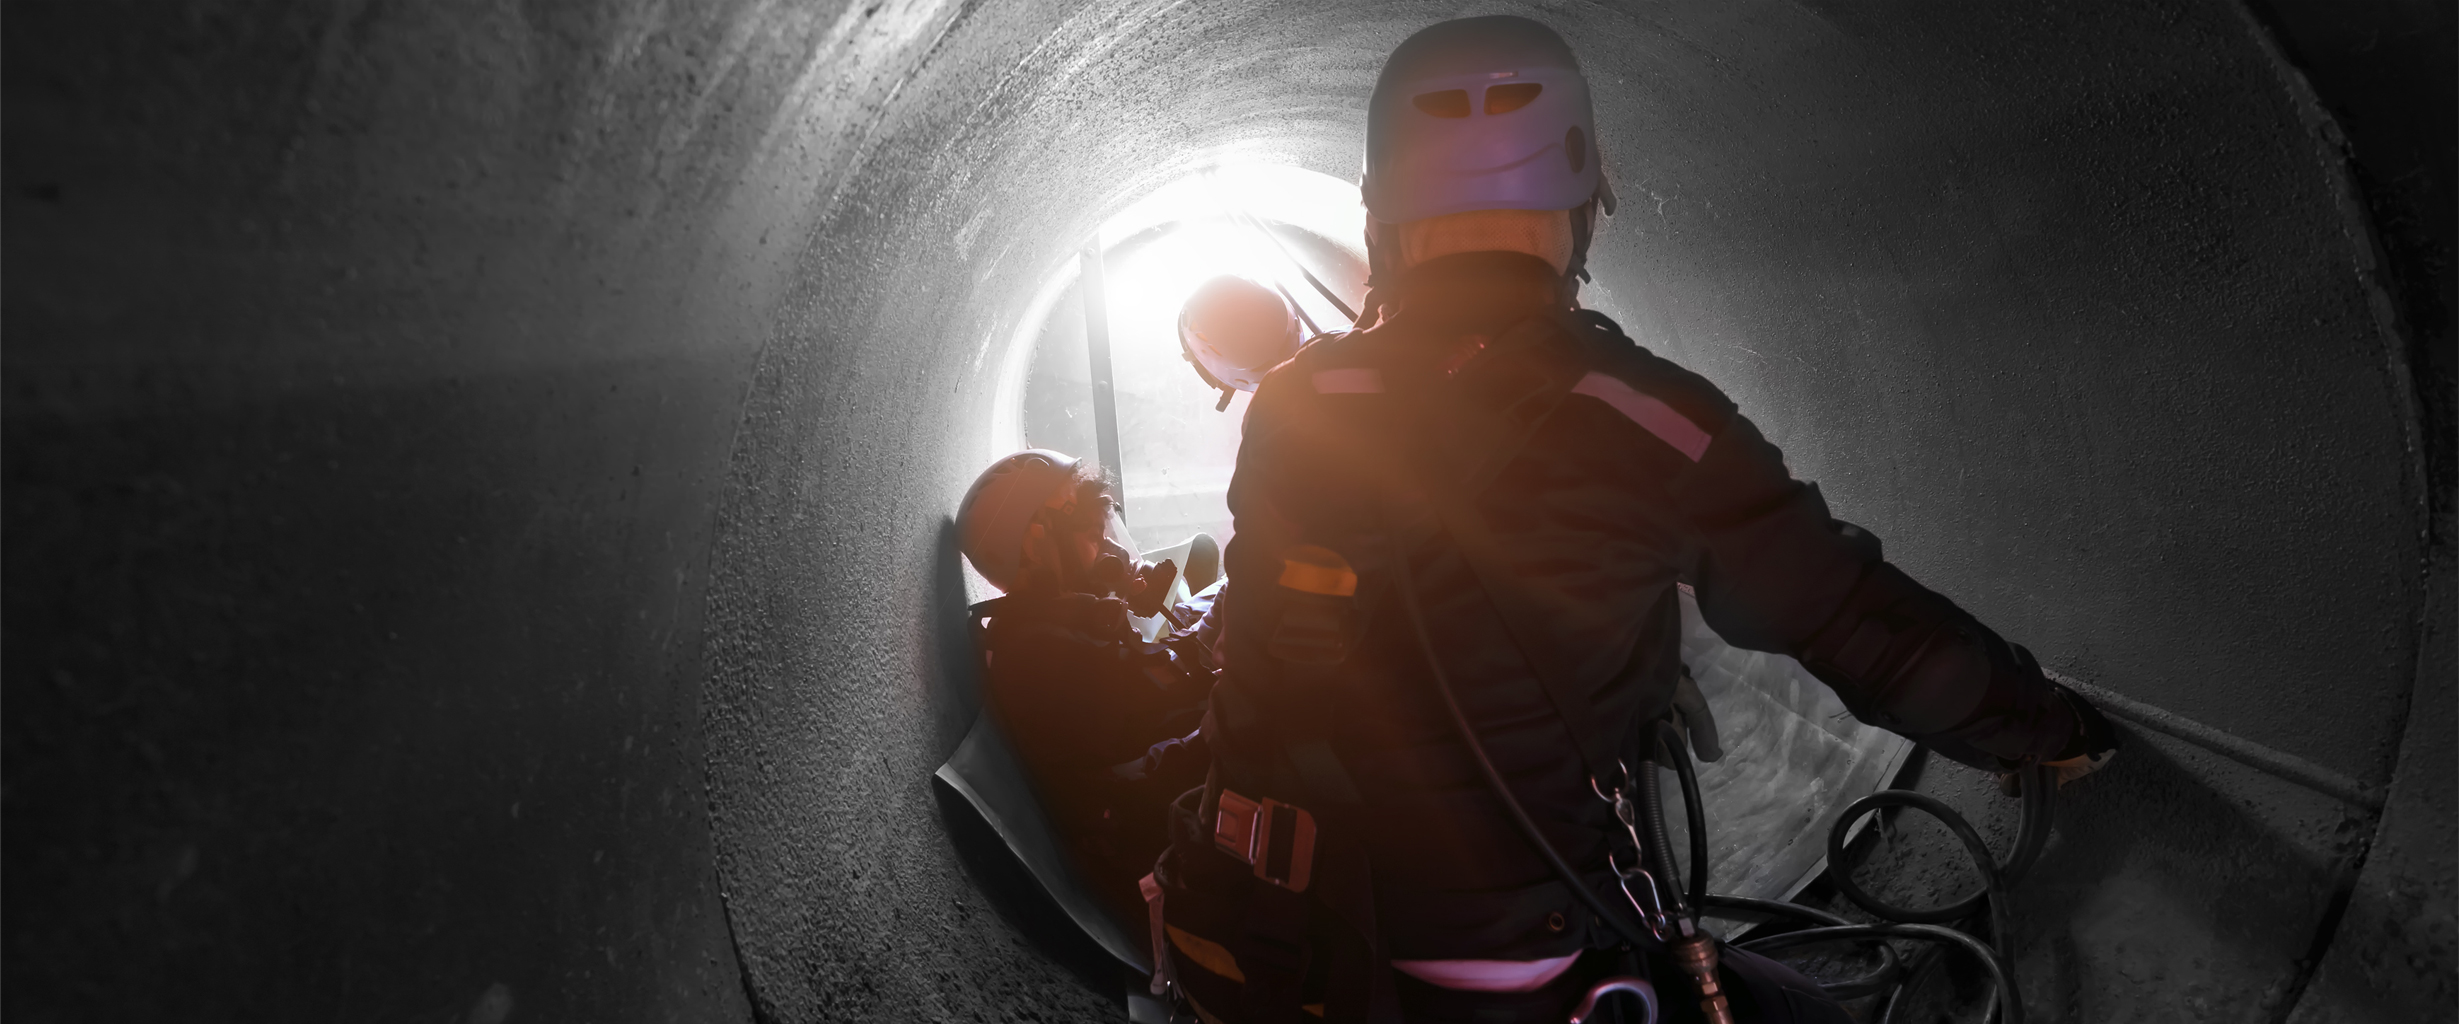 Confined Space Worker Safety